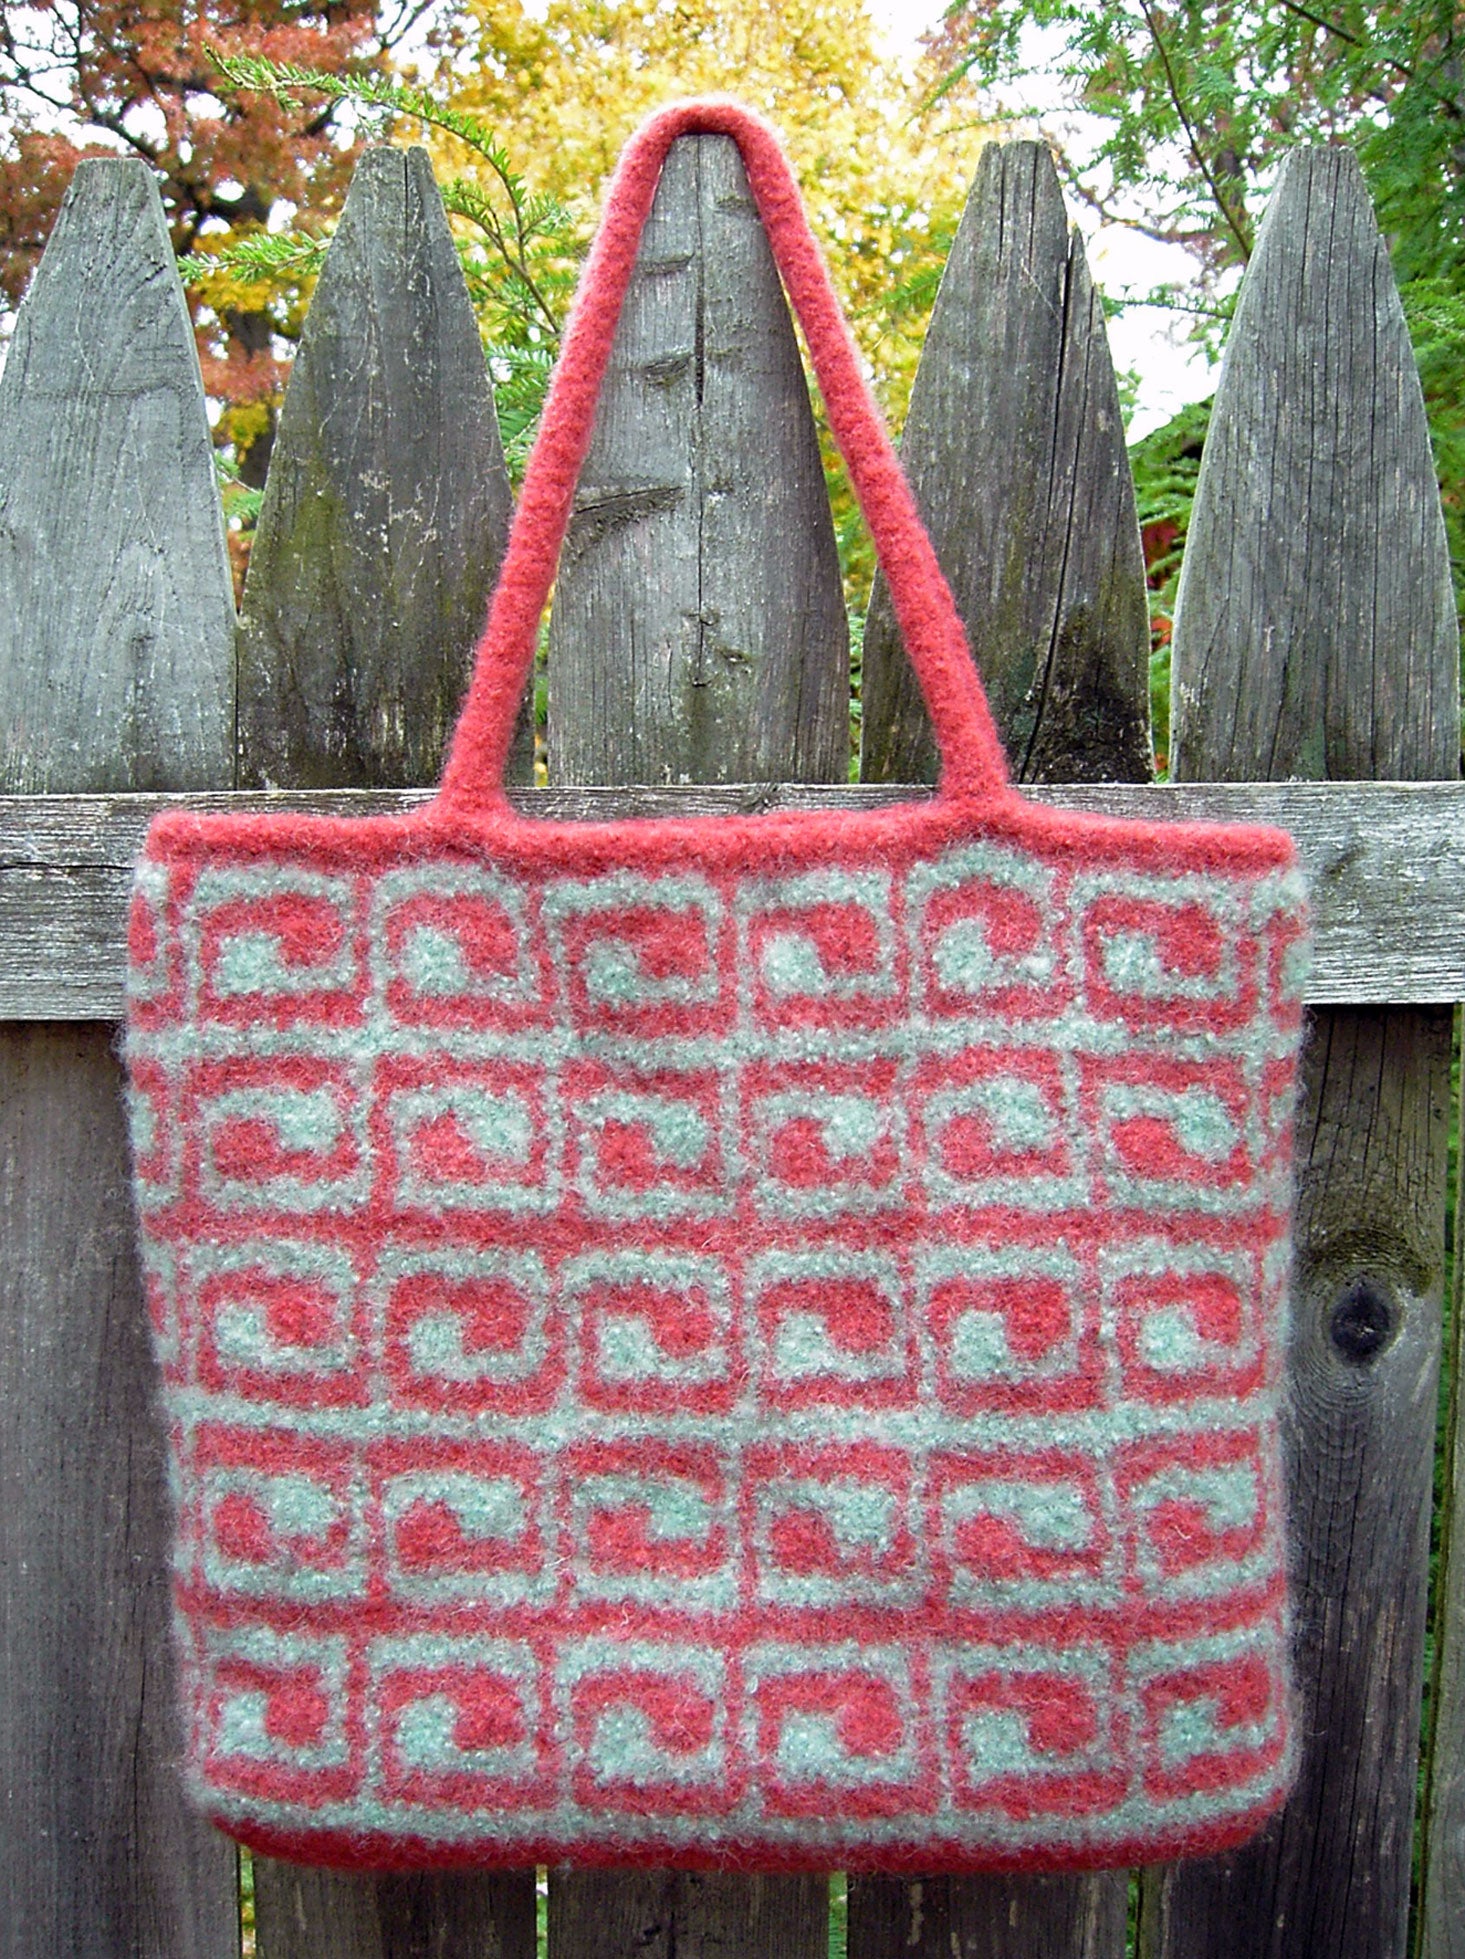 Pattern PDF for Crochet Felted Smoky Bookbag, Purse, Satchel With Appliqués  and Roses - Etsy